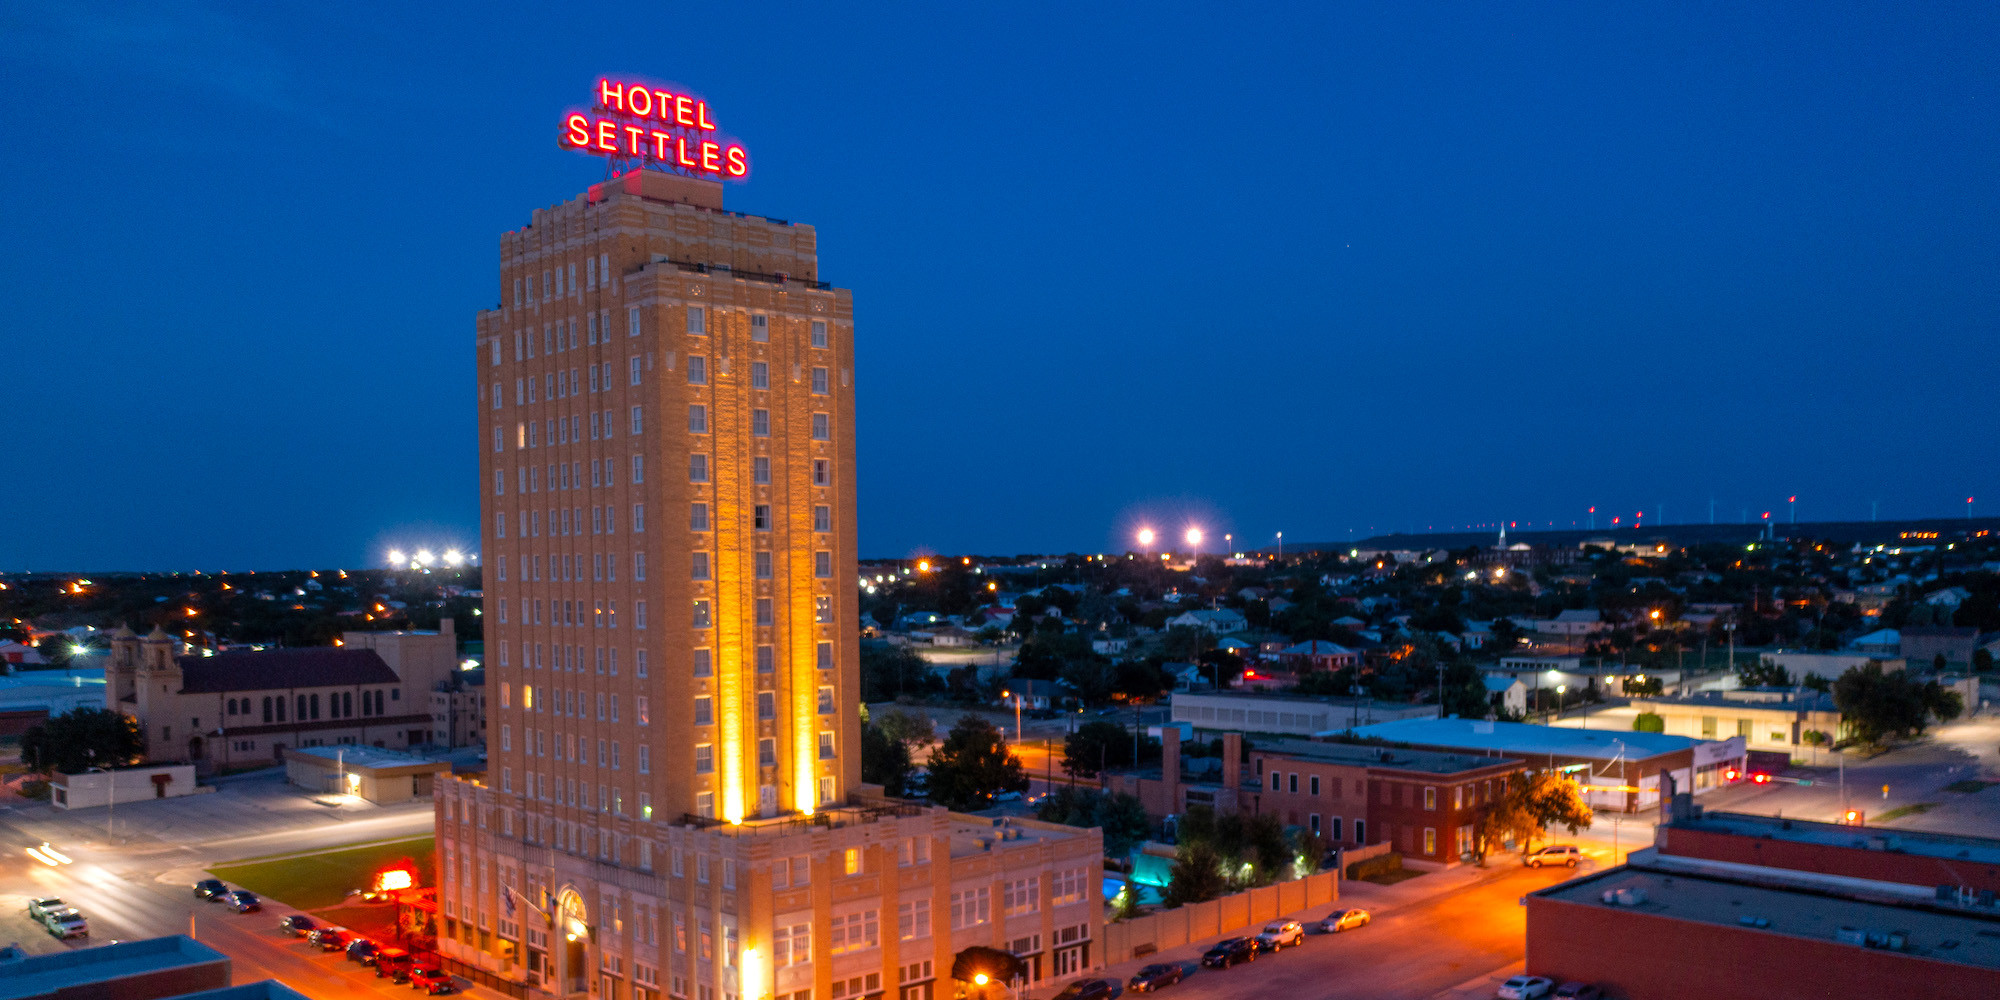 Hotel Settles building lit up at night